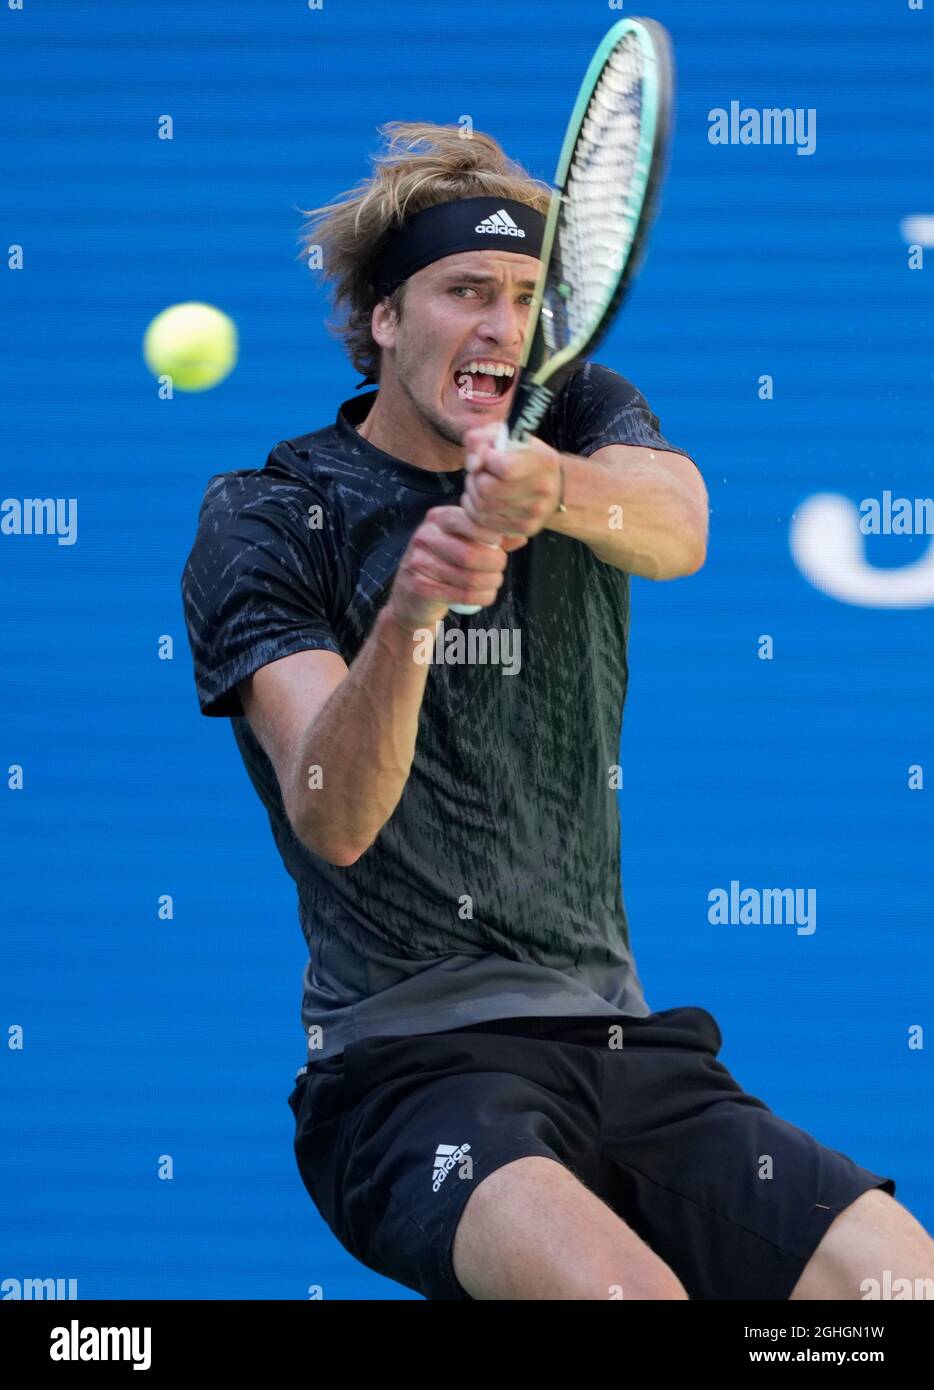 September 6, 2021 Jannik Sinner (ITA) loses to Alexander Zverev (GER), 6-4, 6-4, 7-6 at the US Open being played at Billy Jean King Ntional Tennis Center in Flushing, Queens, New York, USA ©Jo BecktoldTennisclix/CSM(Credit Image ©